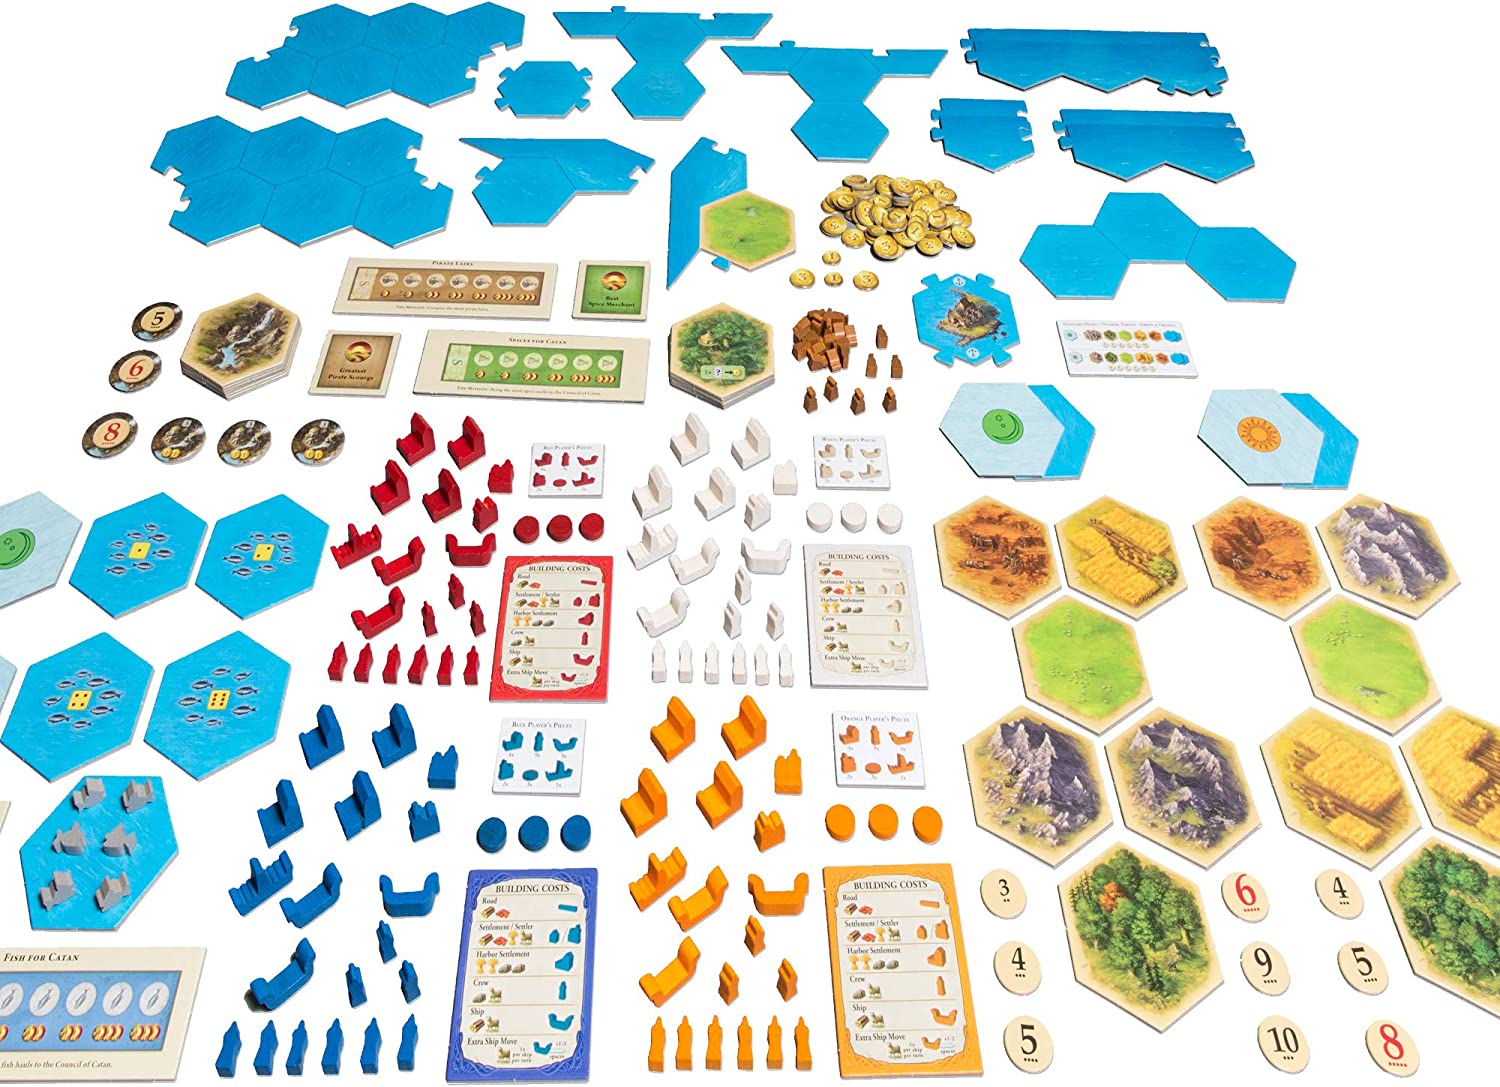 Catan: Seafarers Expansion (5th Edition) components